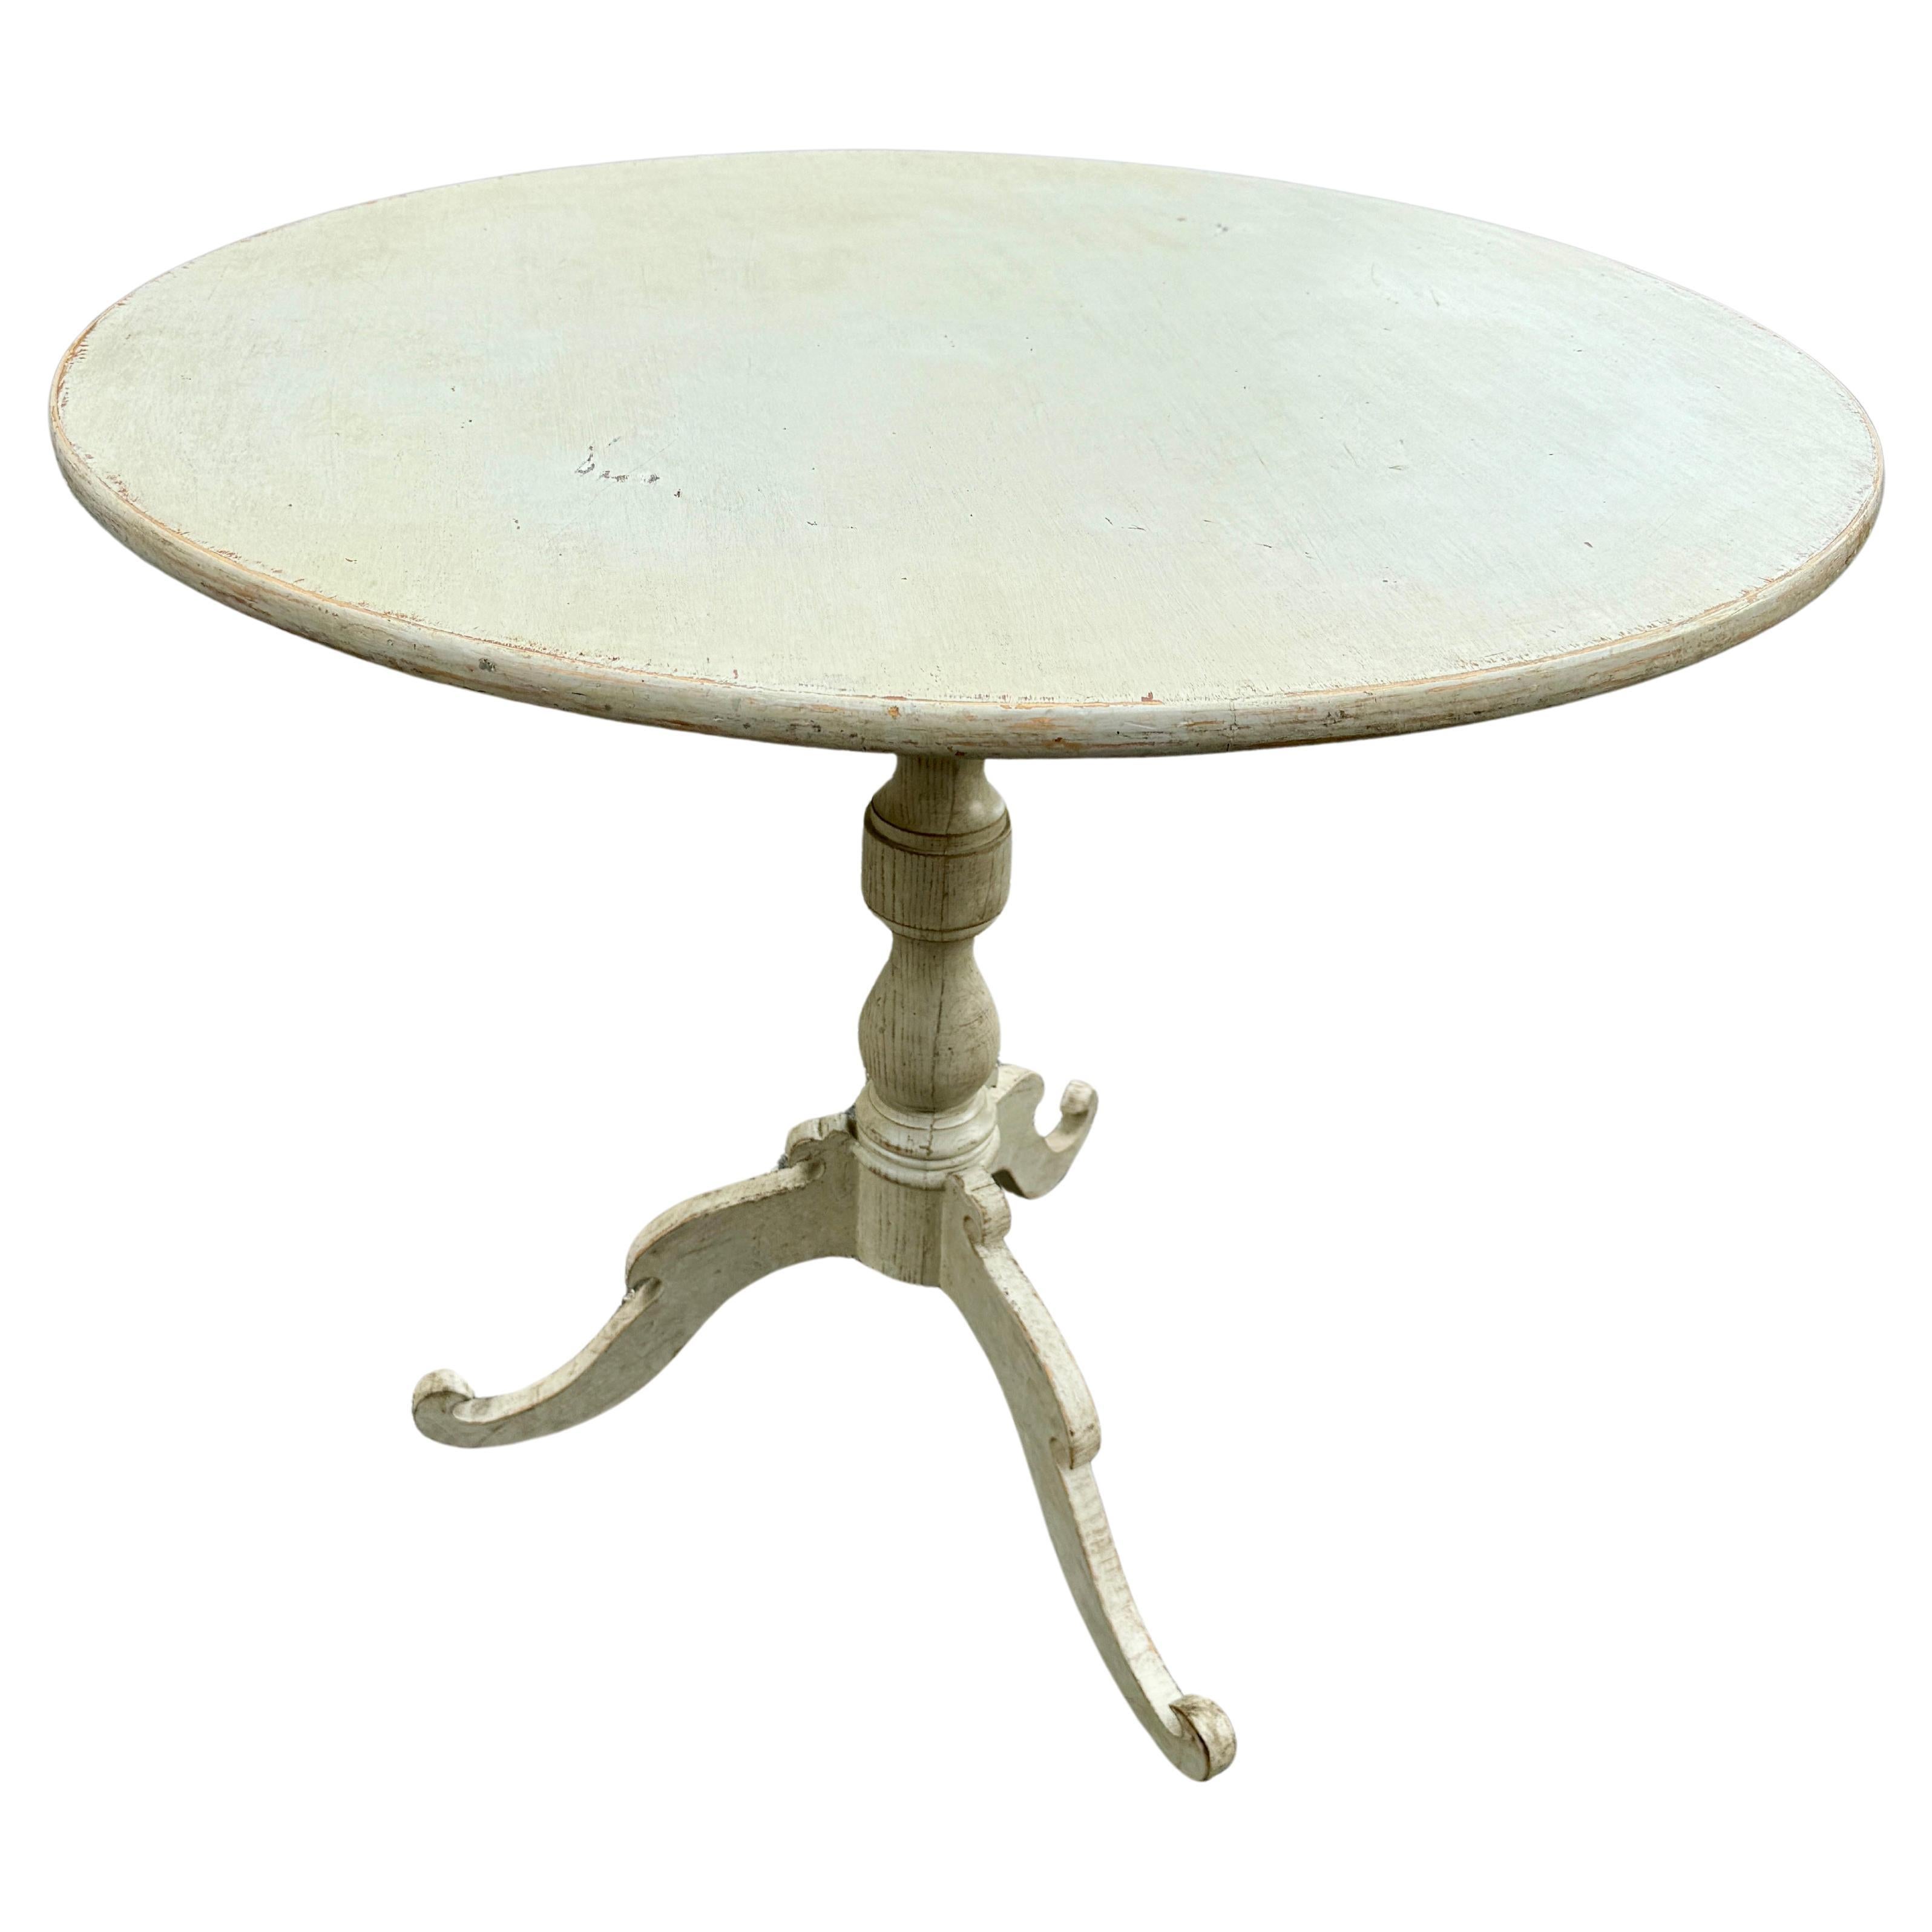 Painted Round Gustavian Center Hall Table

This classic Scandinavian style painted table has been constructed from solid wood with a hand-applied distressed finish. The color on this piece is a warm neutral creamy color, leaning towards a light